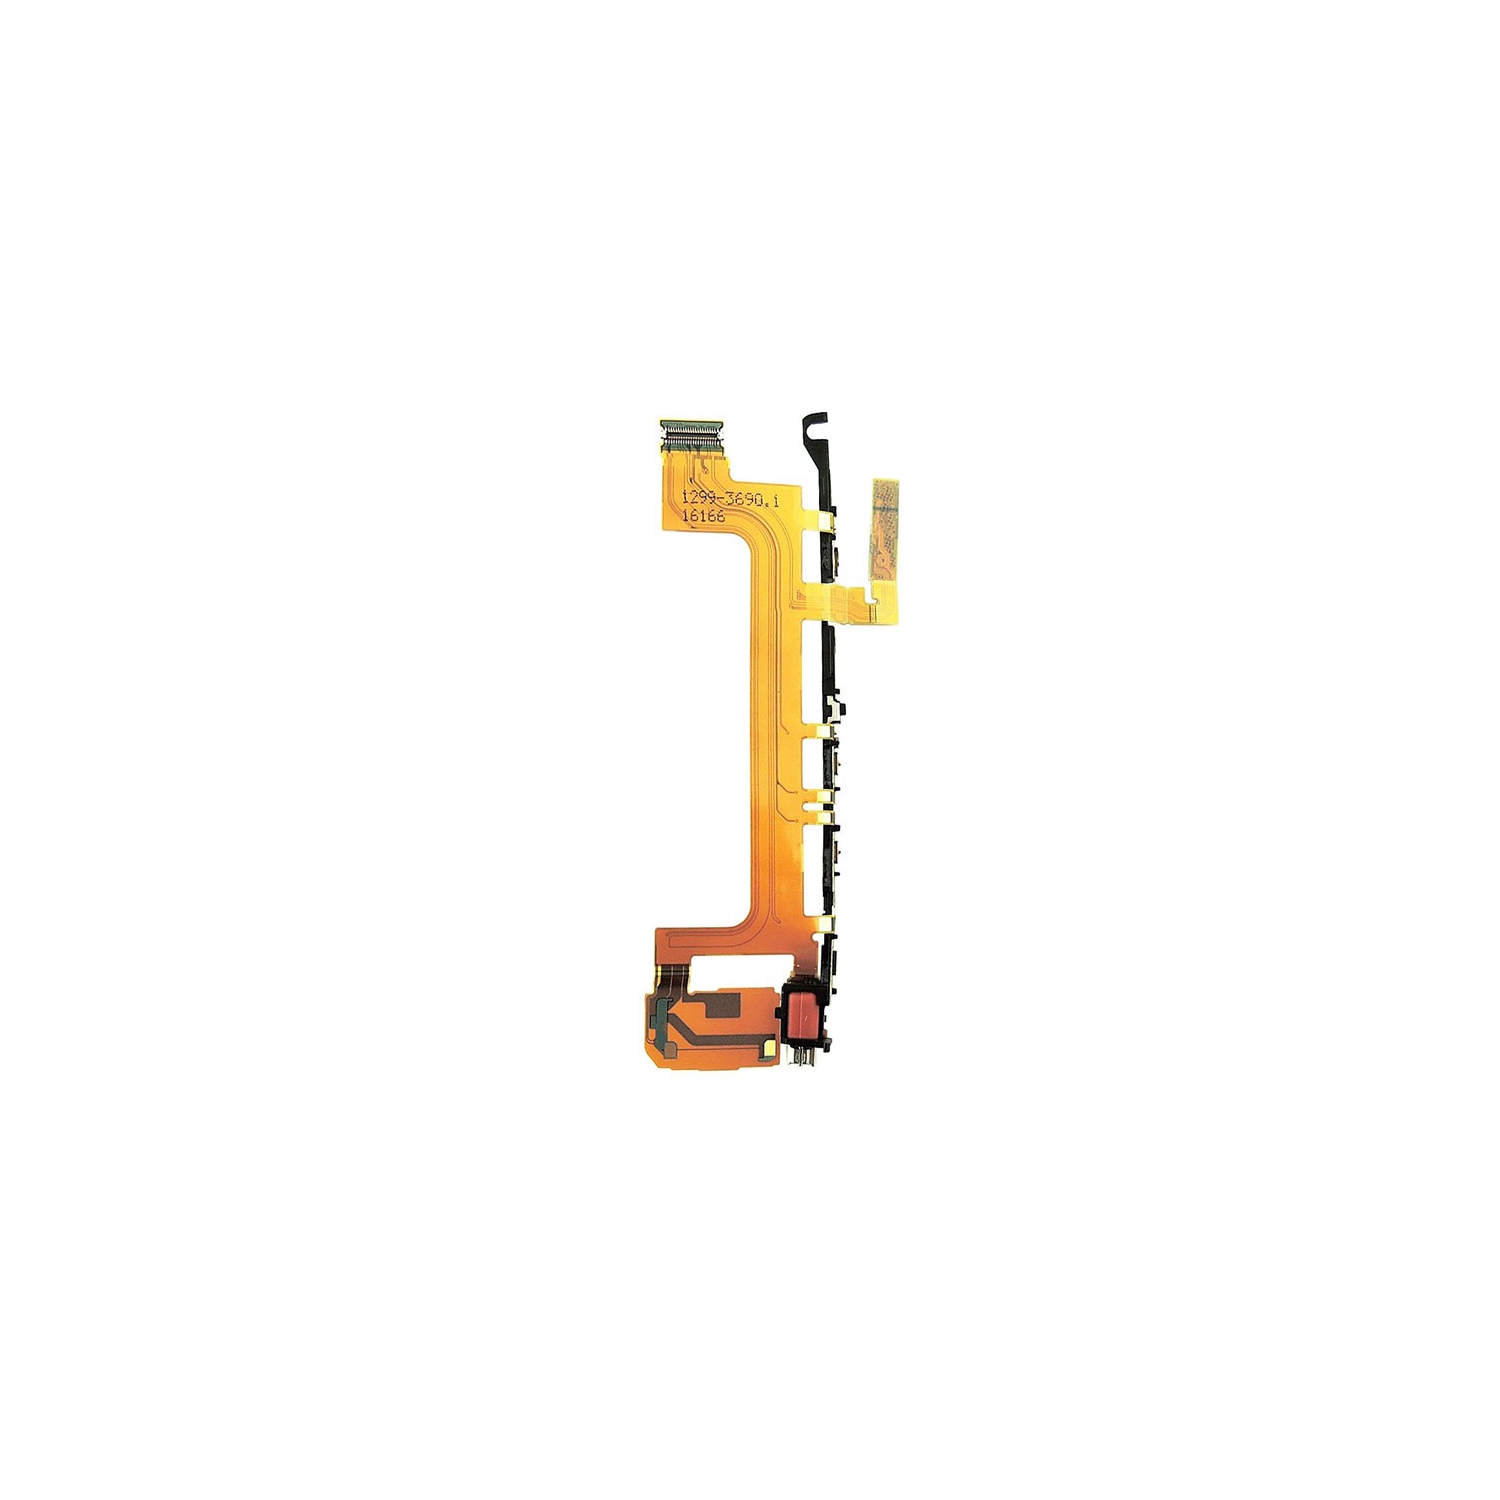 Sony Xperia X Performance Power Button / Volume Button Flex Cable